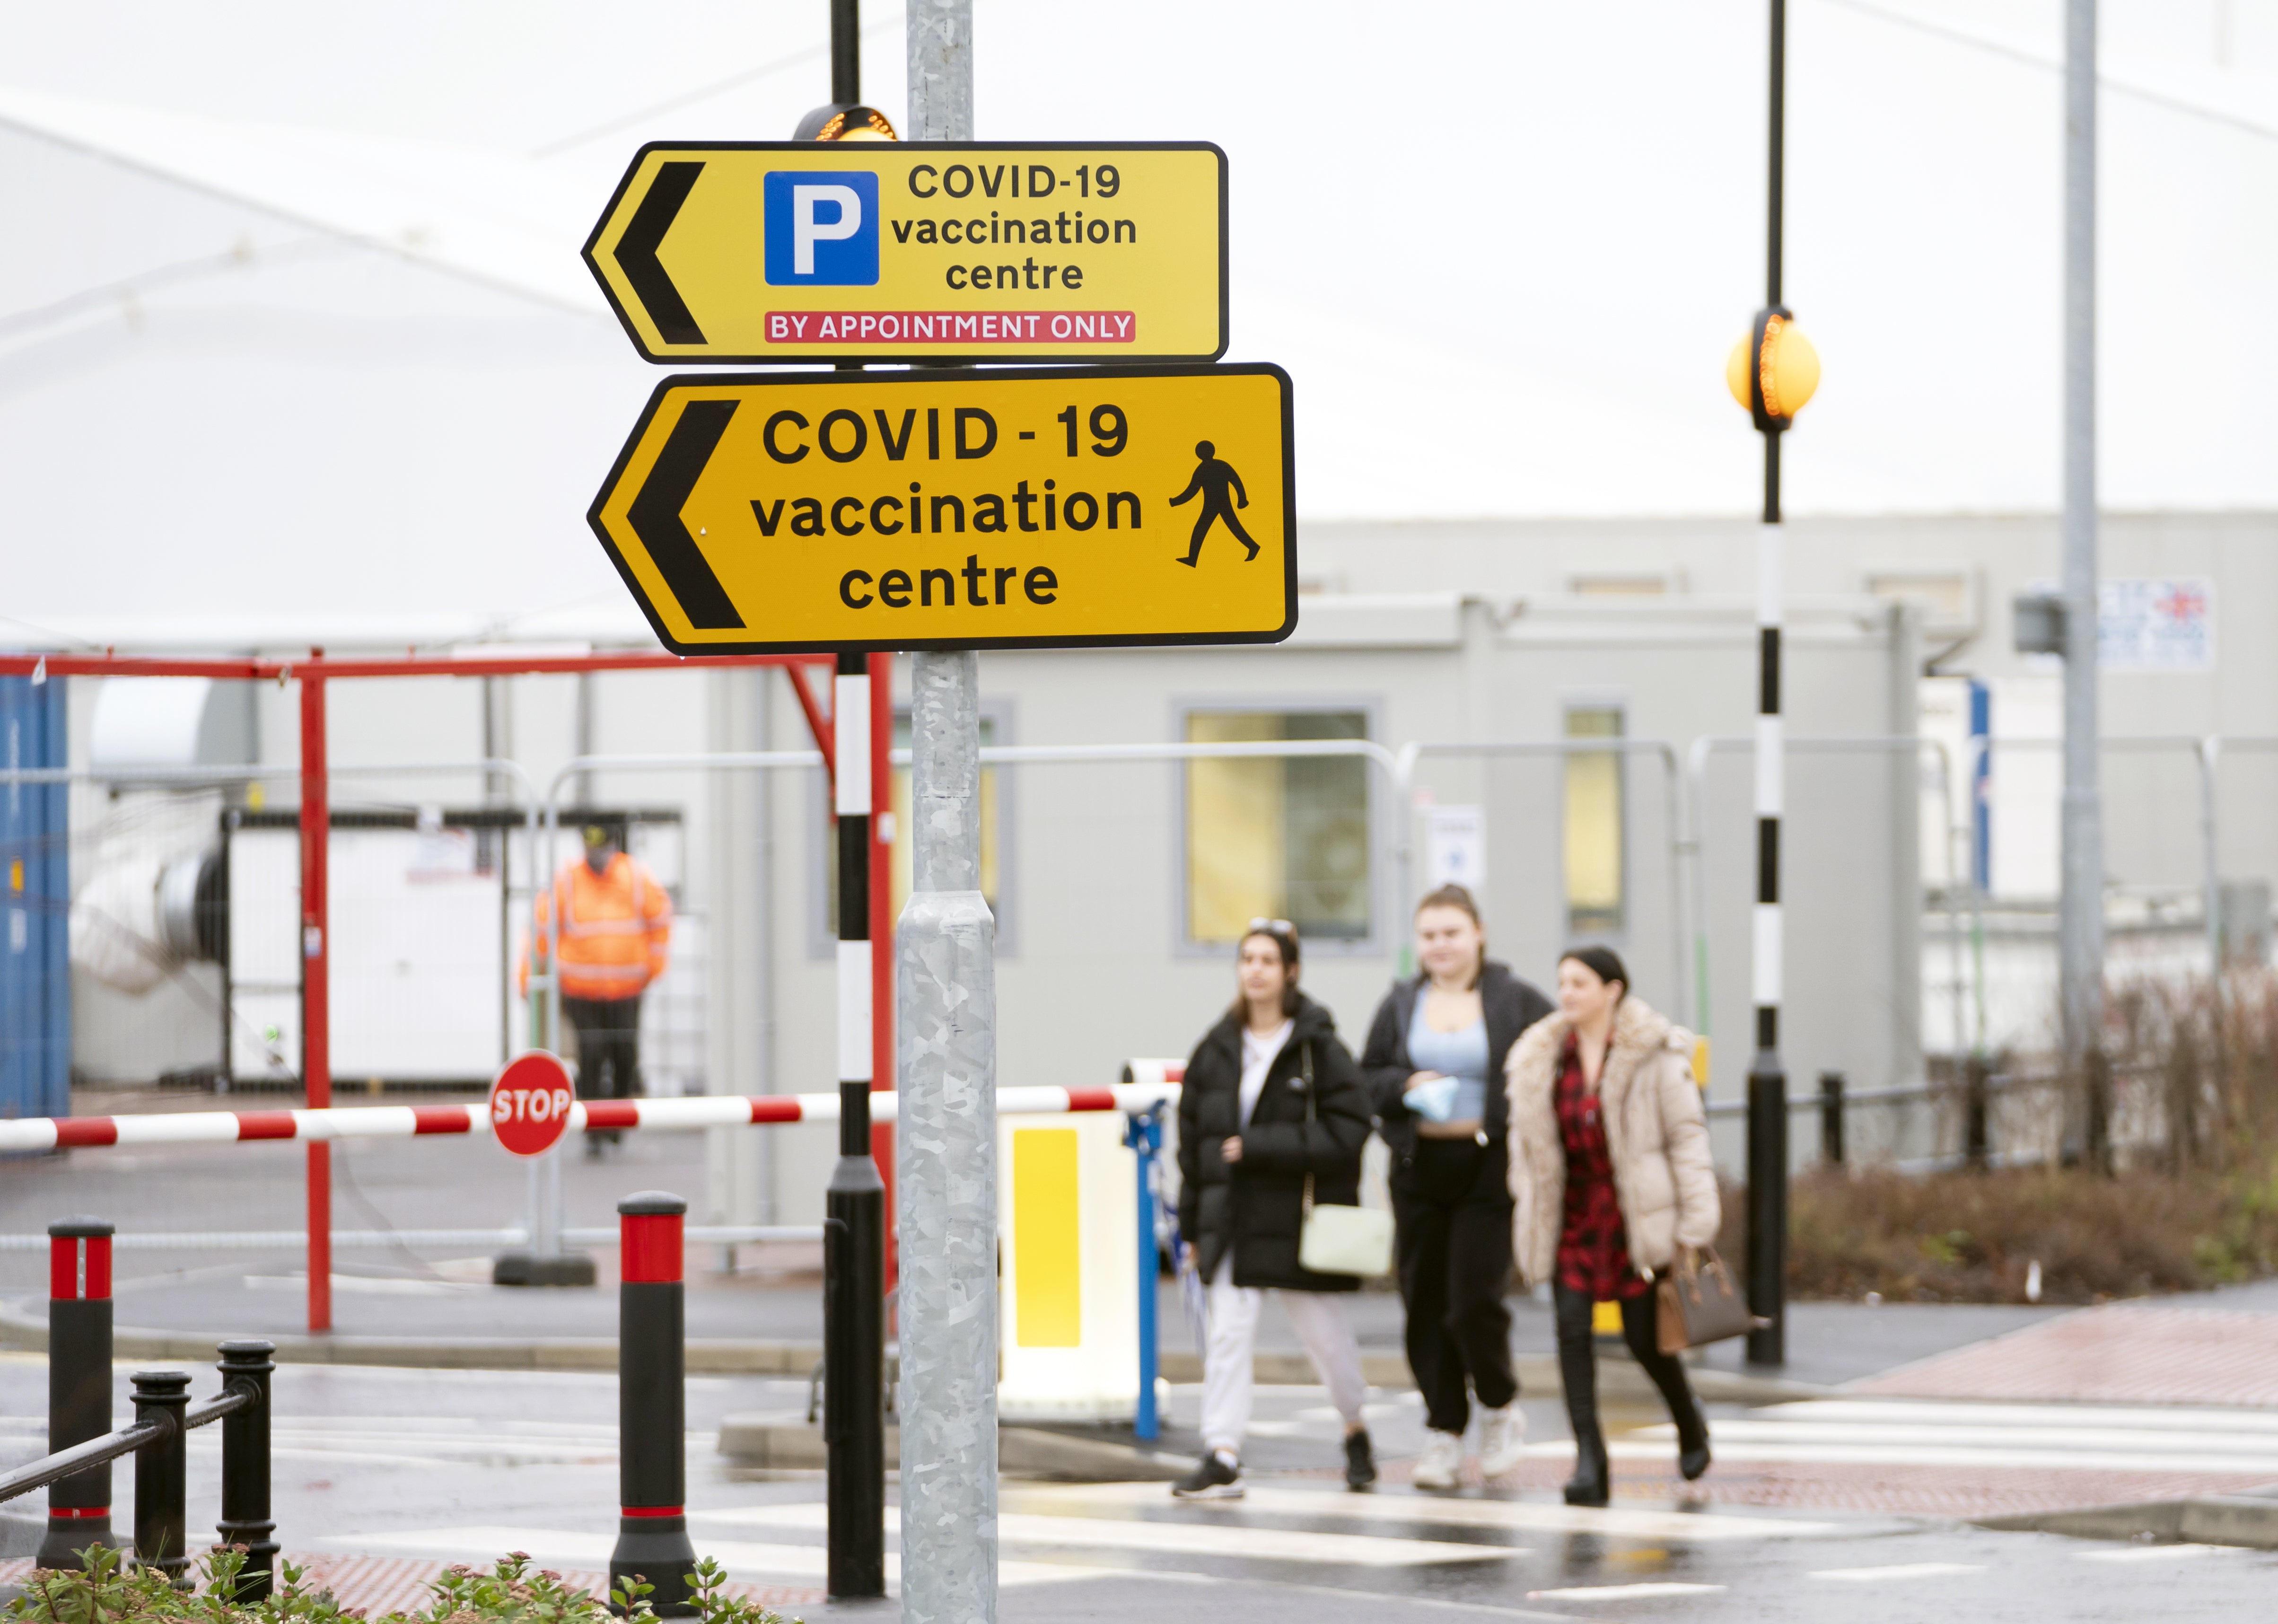 People arrive at a vaccination centre at Elland Road in Leeds (Danny Lawson/PA)